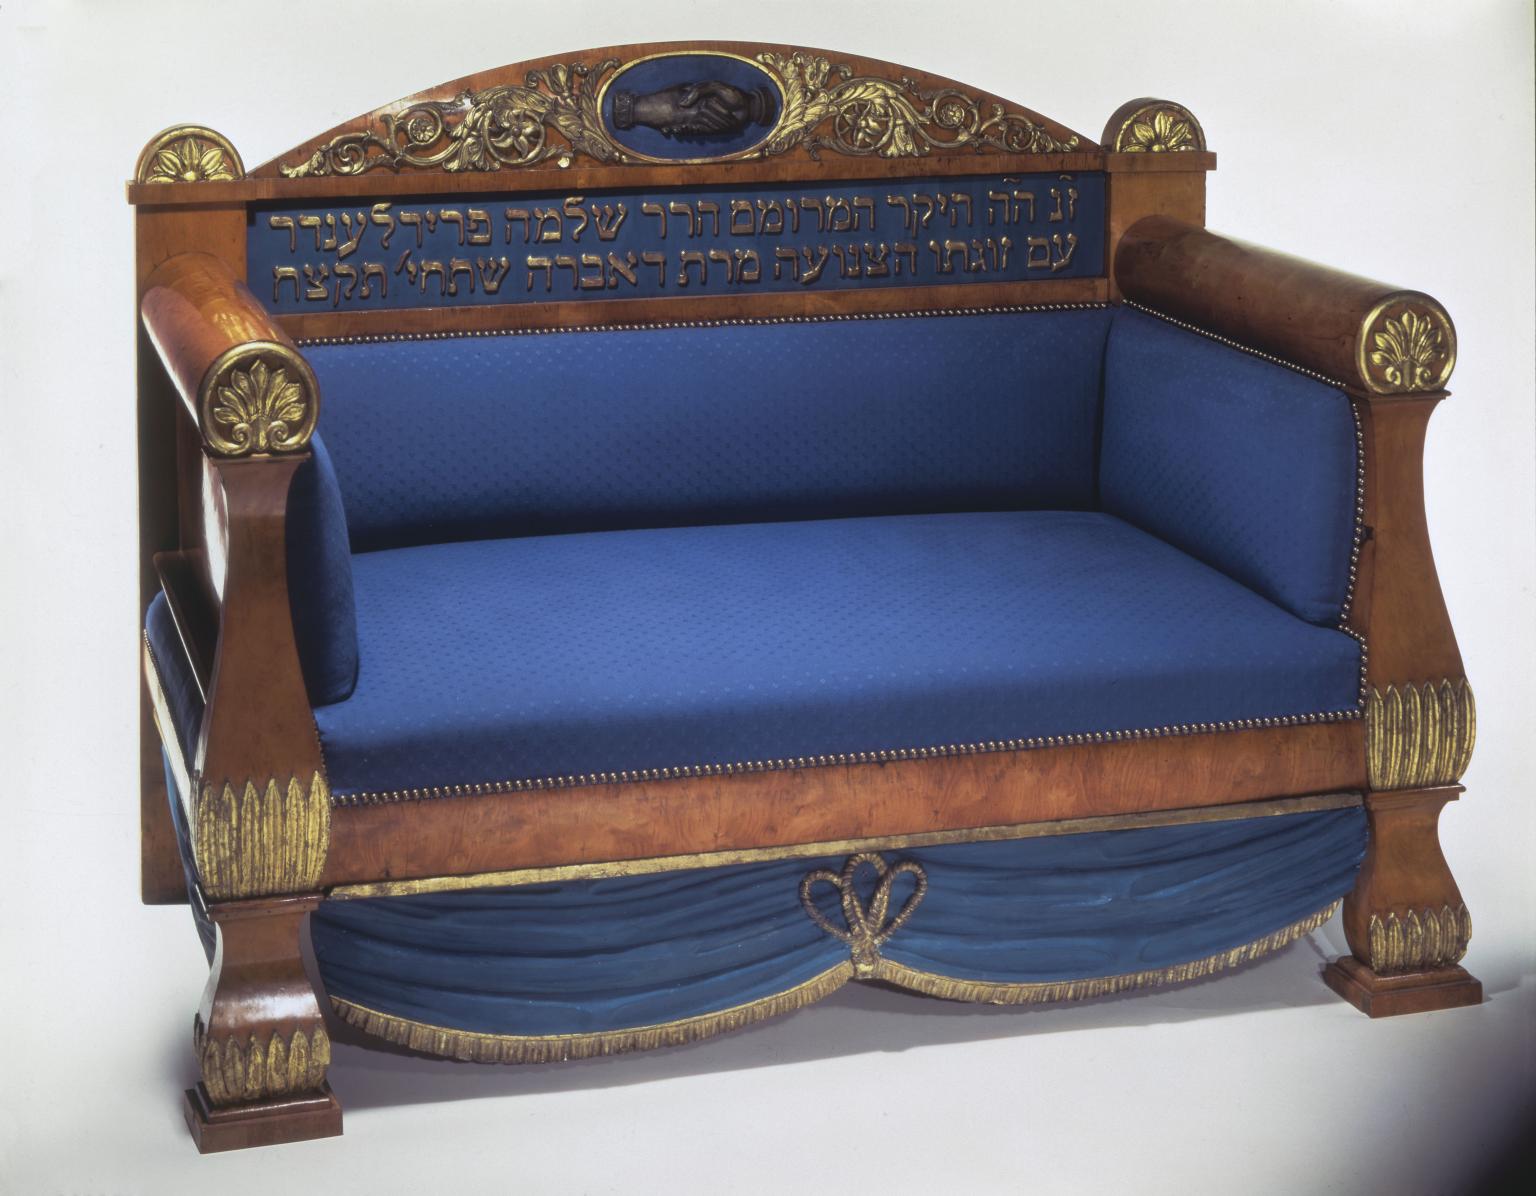 Wooden sofa with upholstered seat, featuring an image of clasped hands and Hebrew inscription on seat back. 